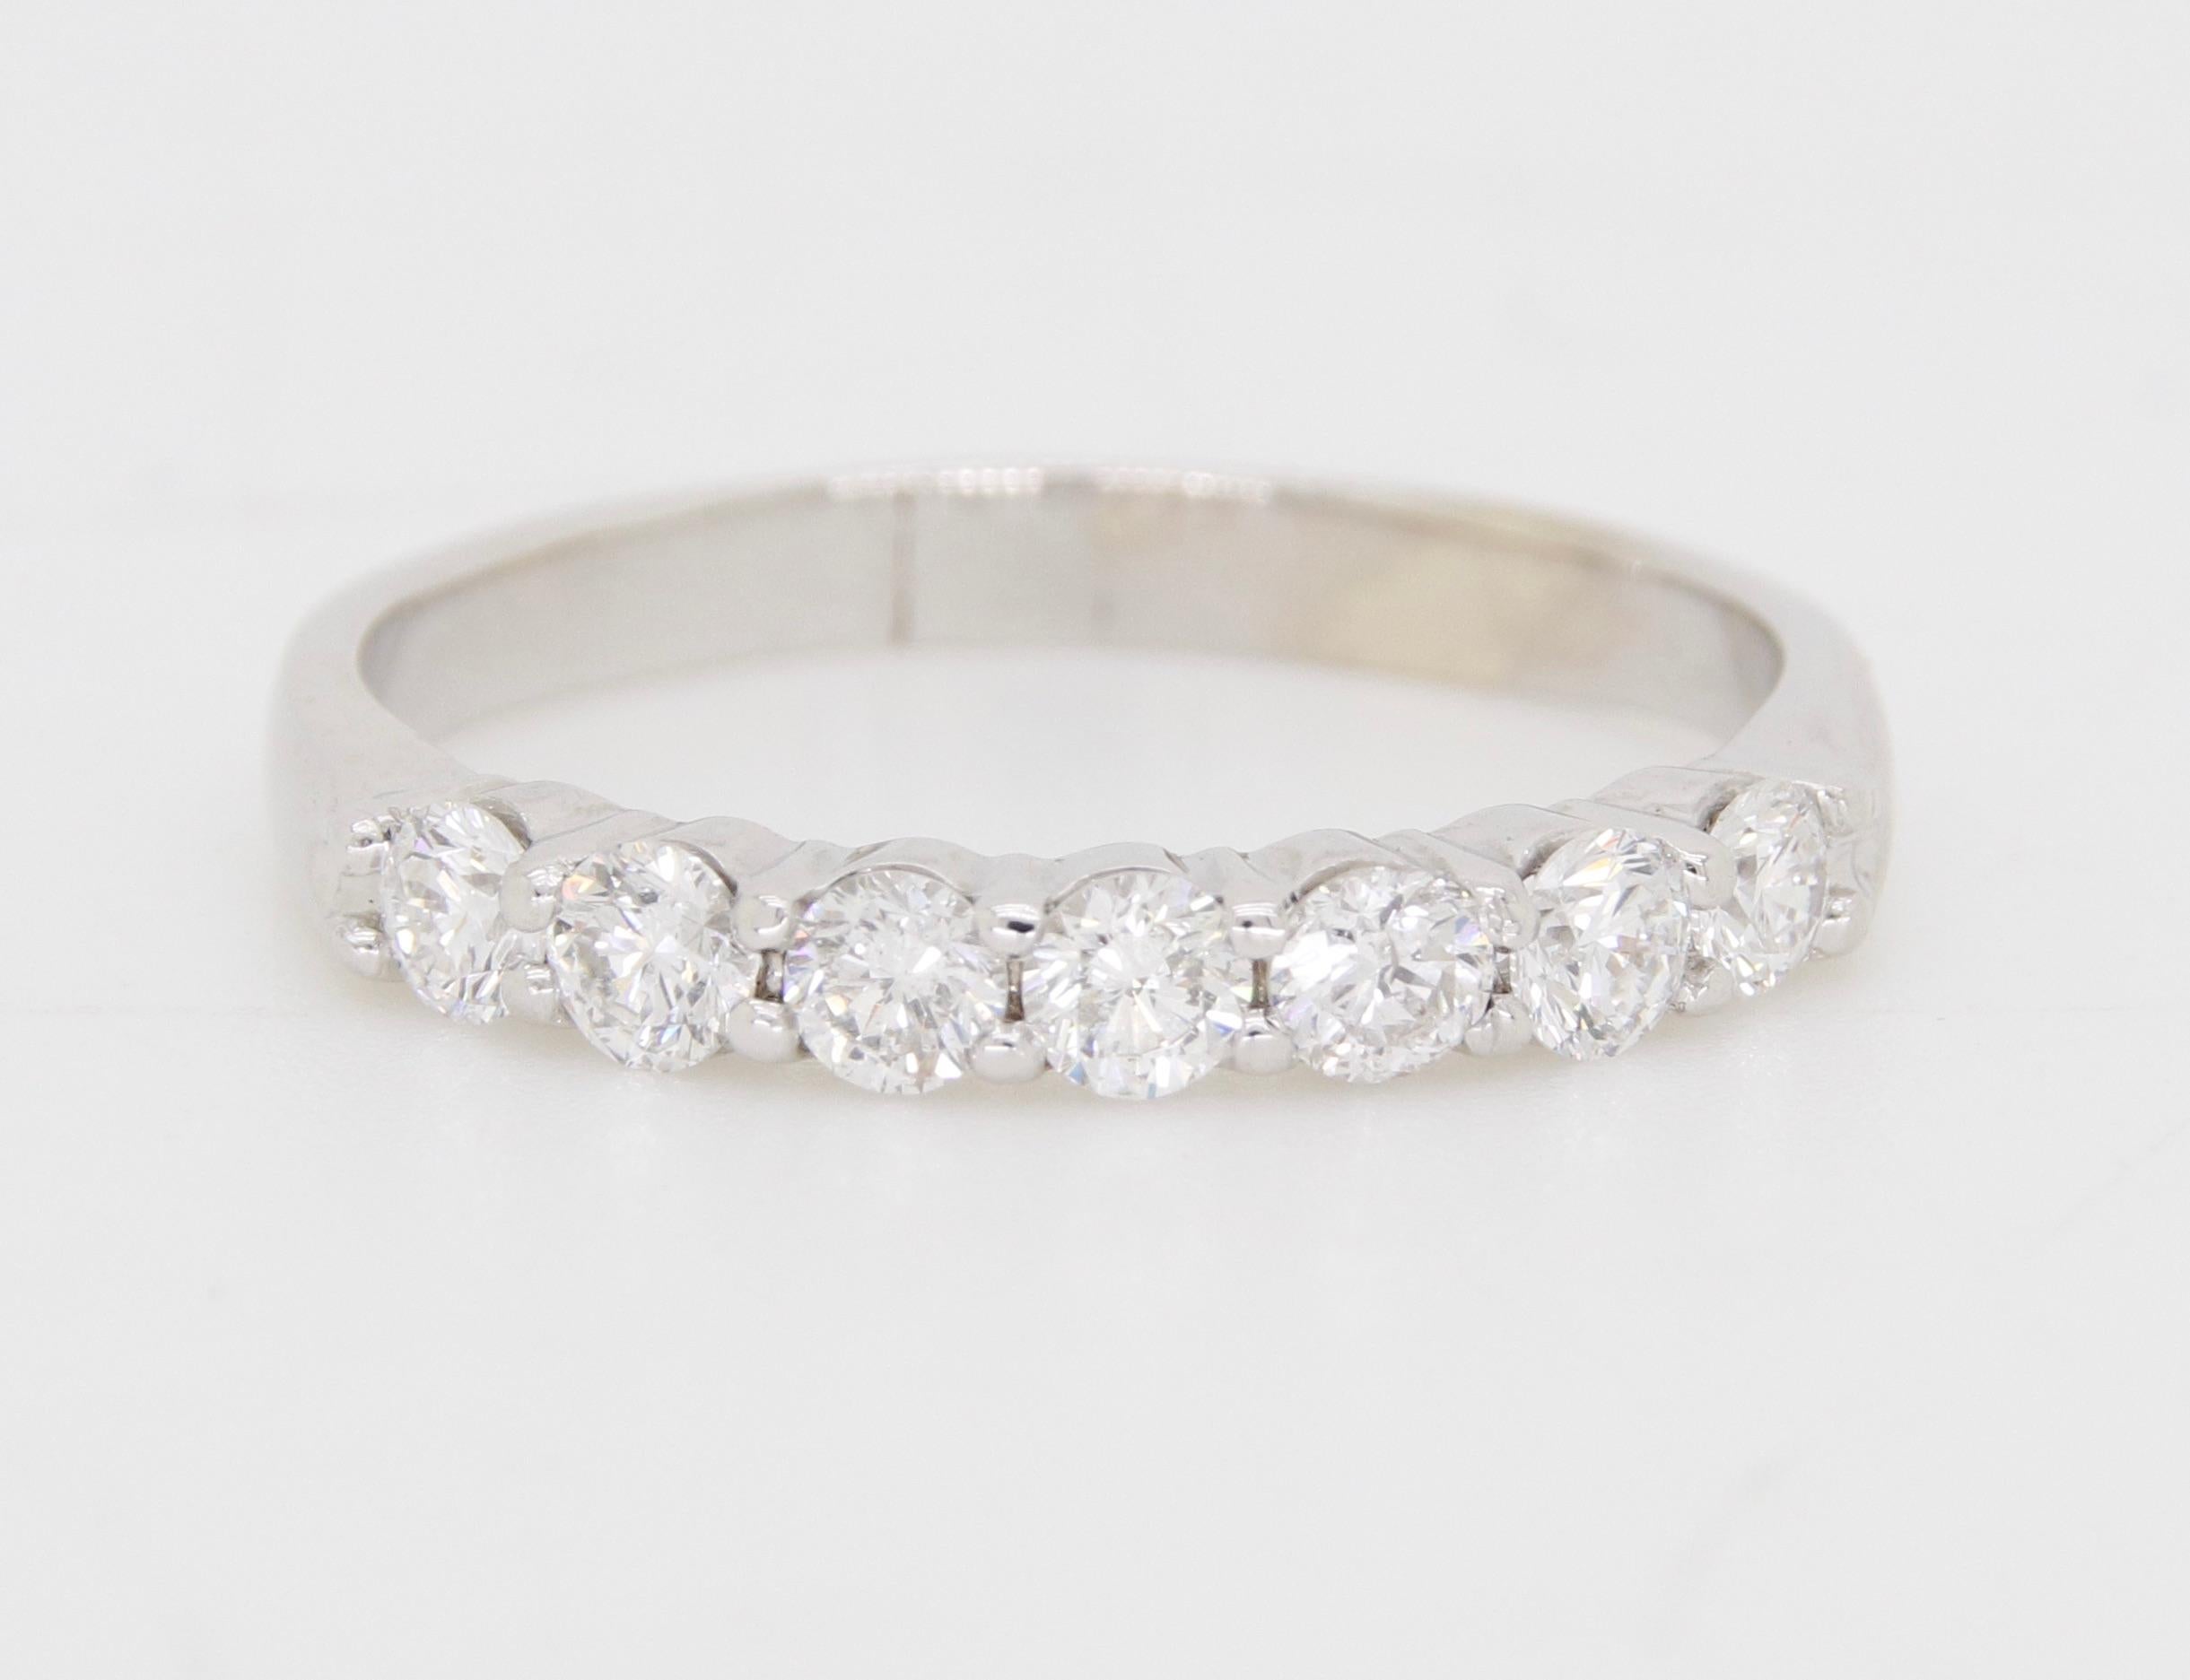 Classic diamond band made with .70ctw of Round Brilliant cut diamonds in 18k White Gold. 

Diamond Cut: Round Brilliant 
Total Diamond Carat Weight: .70CTW
Average Diamond Color: G-I
Average Diamond Clarity: SI2-I1
Metal: 18k White Gold
Ring Size: